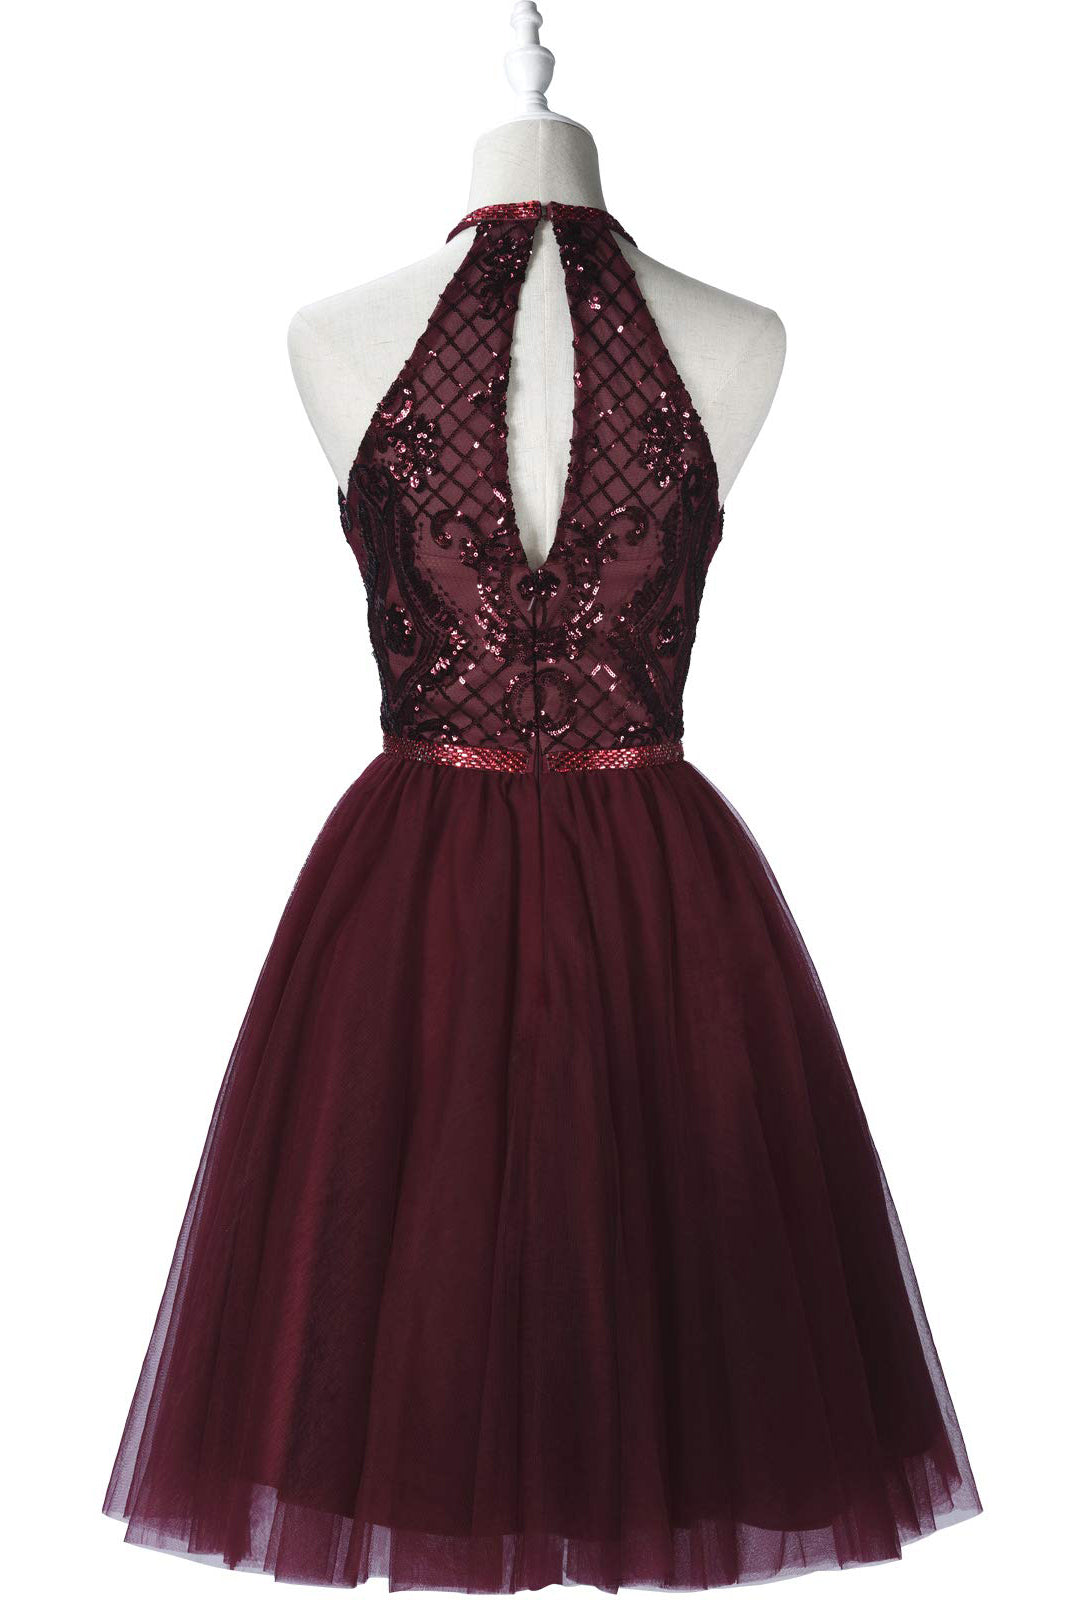 Burgundy A-Line Halter Tulle Homecoming Dress With Appliques